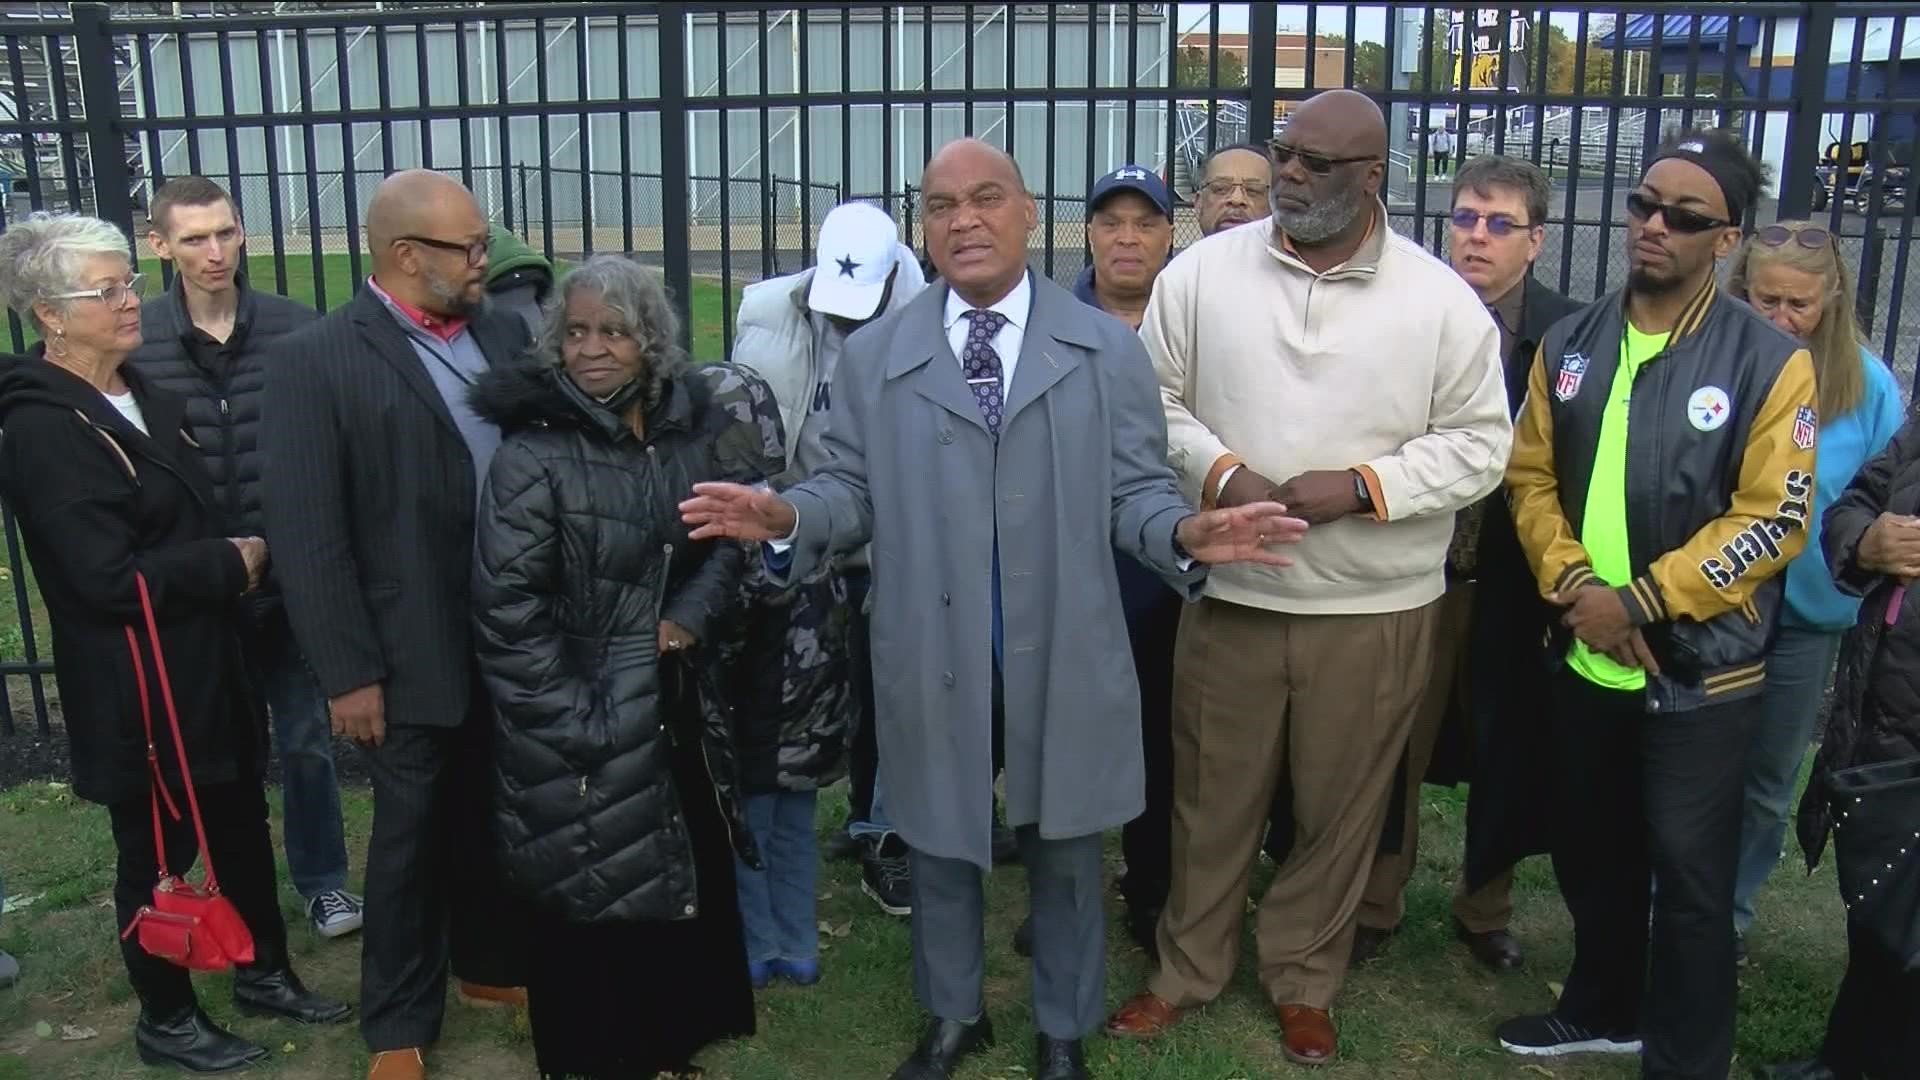 Leaders of Toledo-area churches assembled to pray for the three victims wounded in the shooting, as well as everyone else affected by the violence.